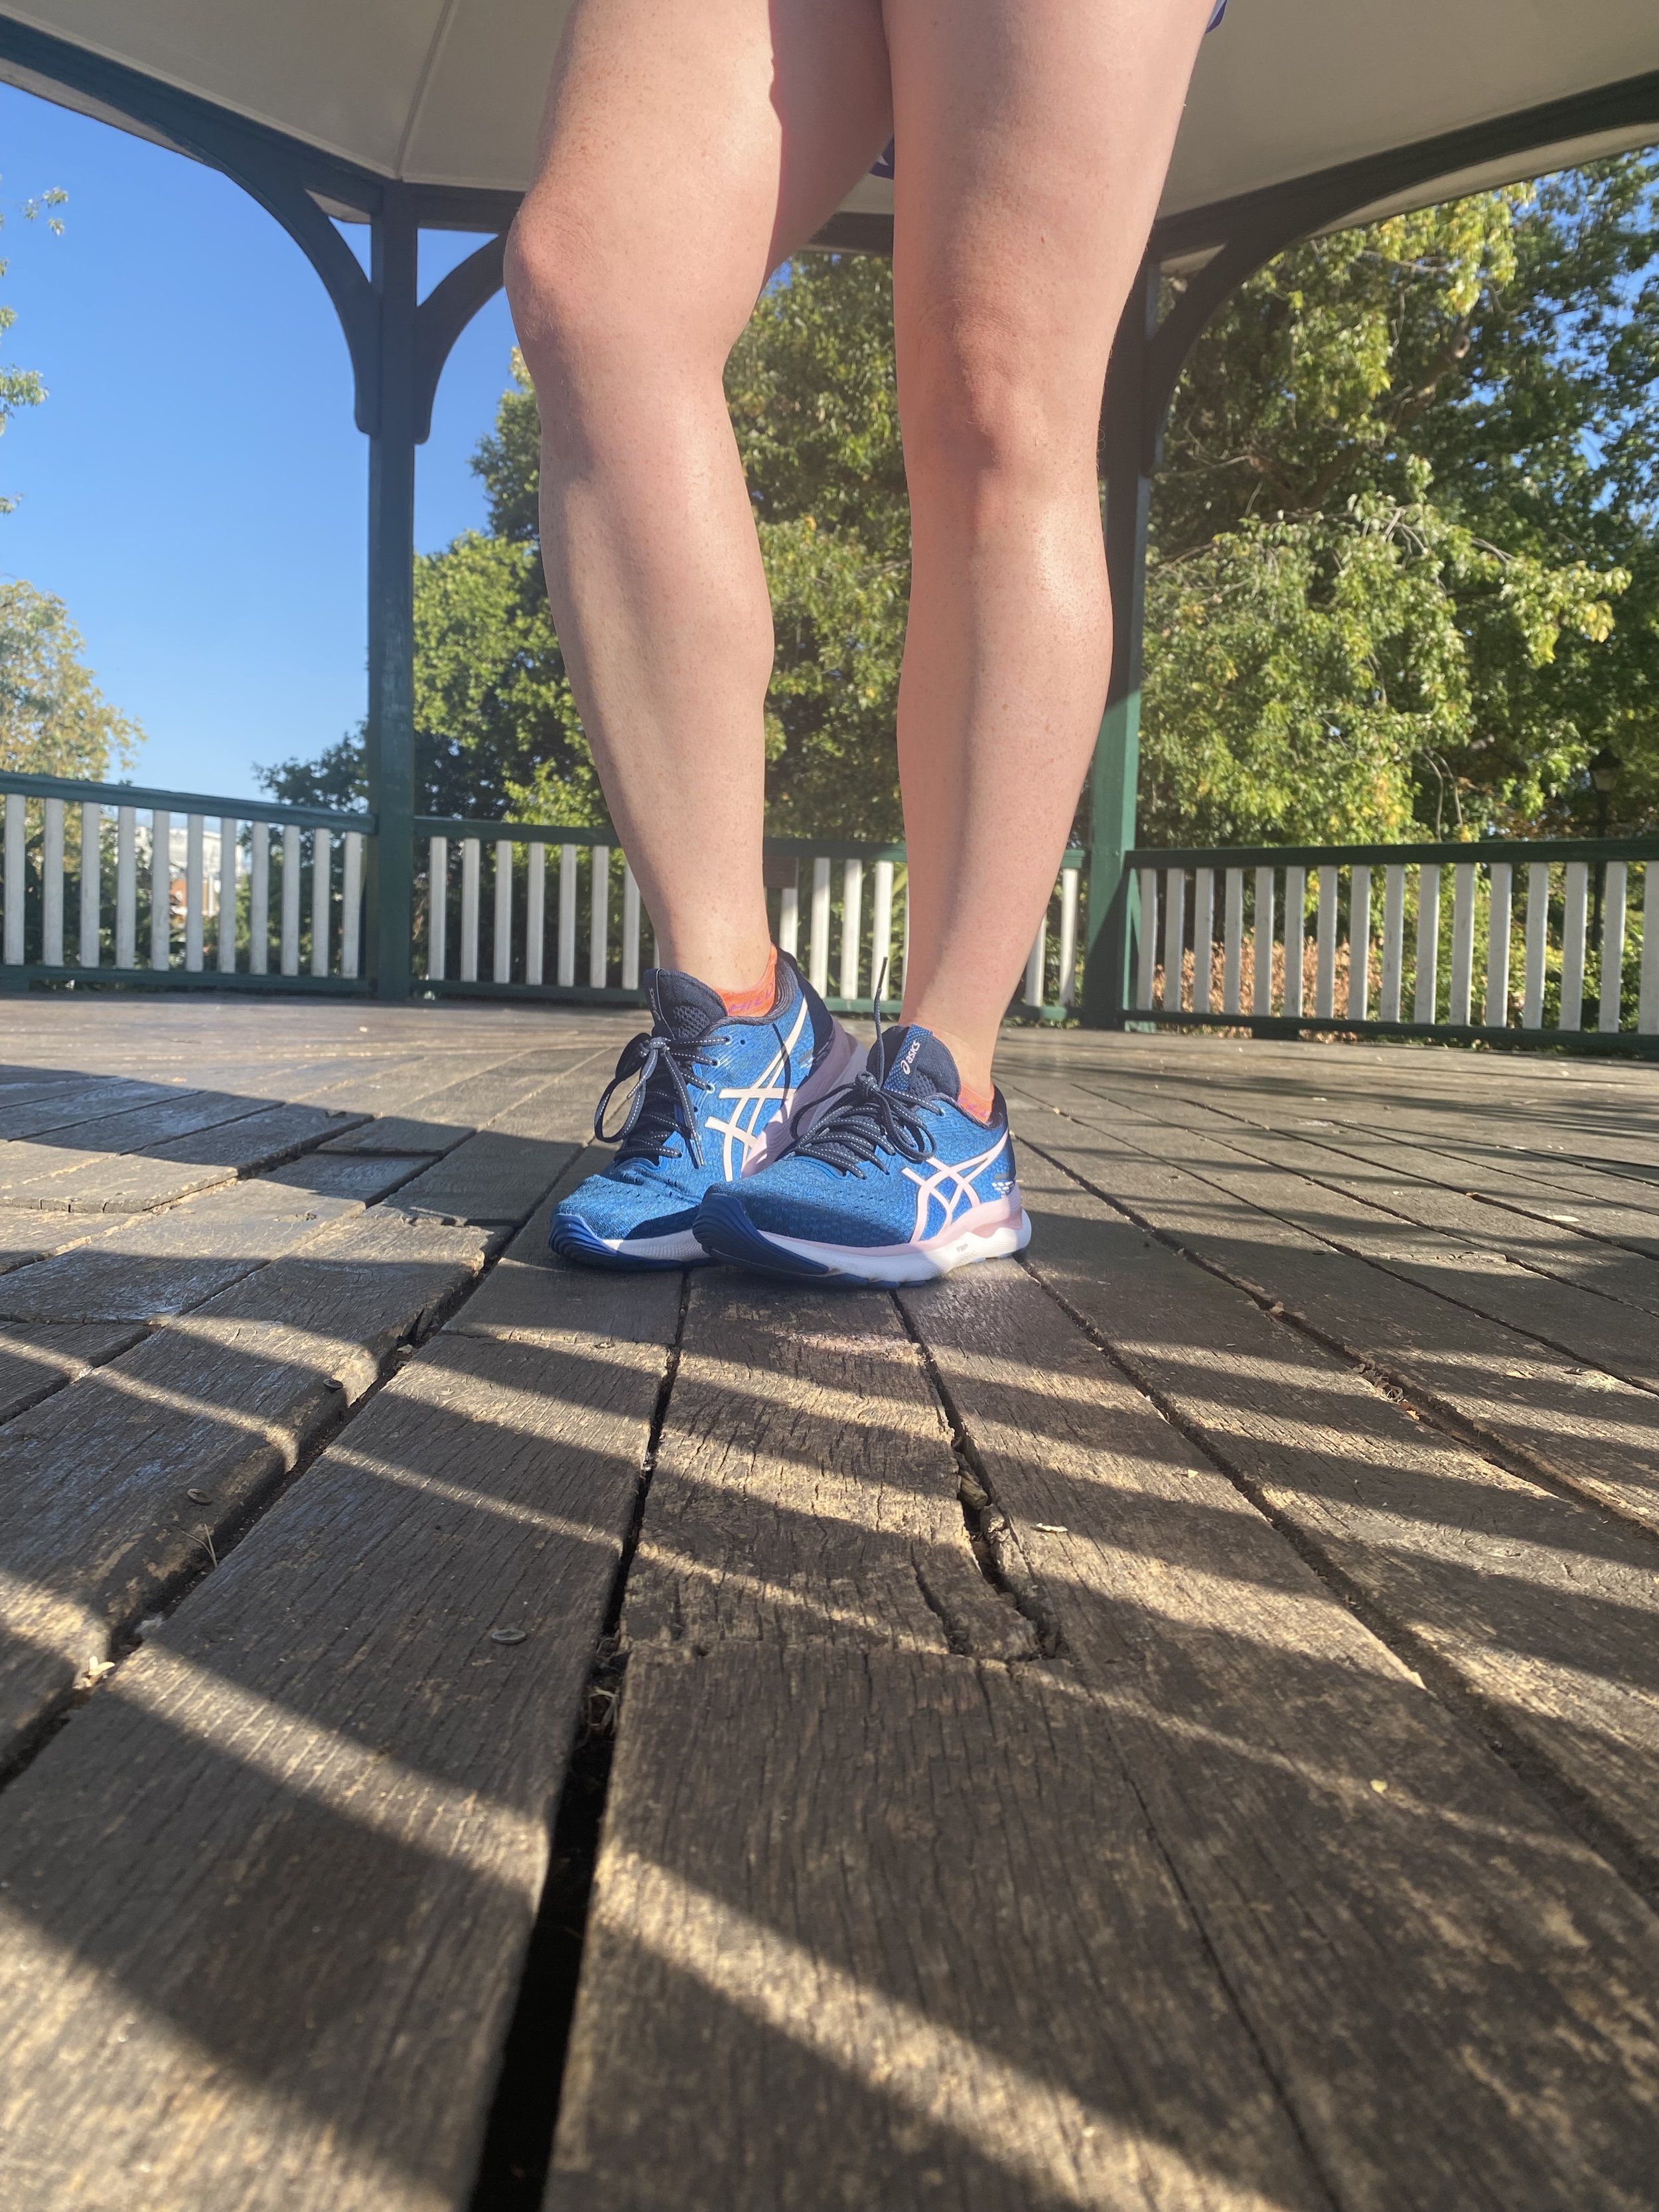 Asics Gel-Nimbus 25 Review | Tried & Tested by MH